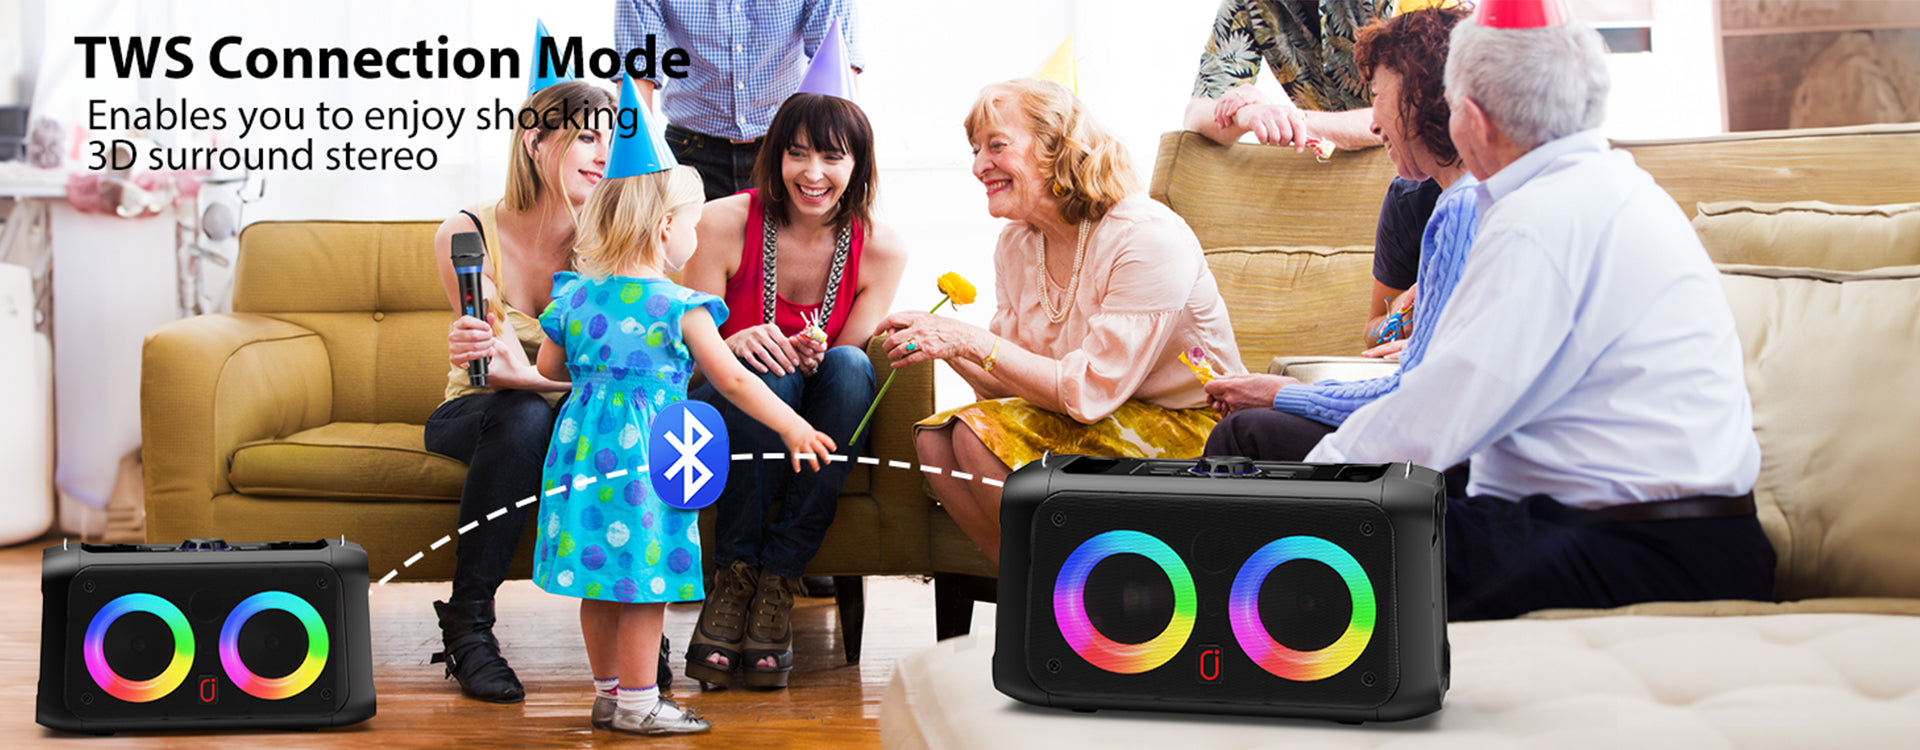 TWS Connection Mode for JYX T20T Portable Karaoke Machine with 2 wireless mics, providing immersive 3D surround stereo.